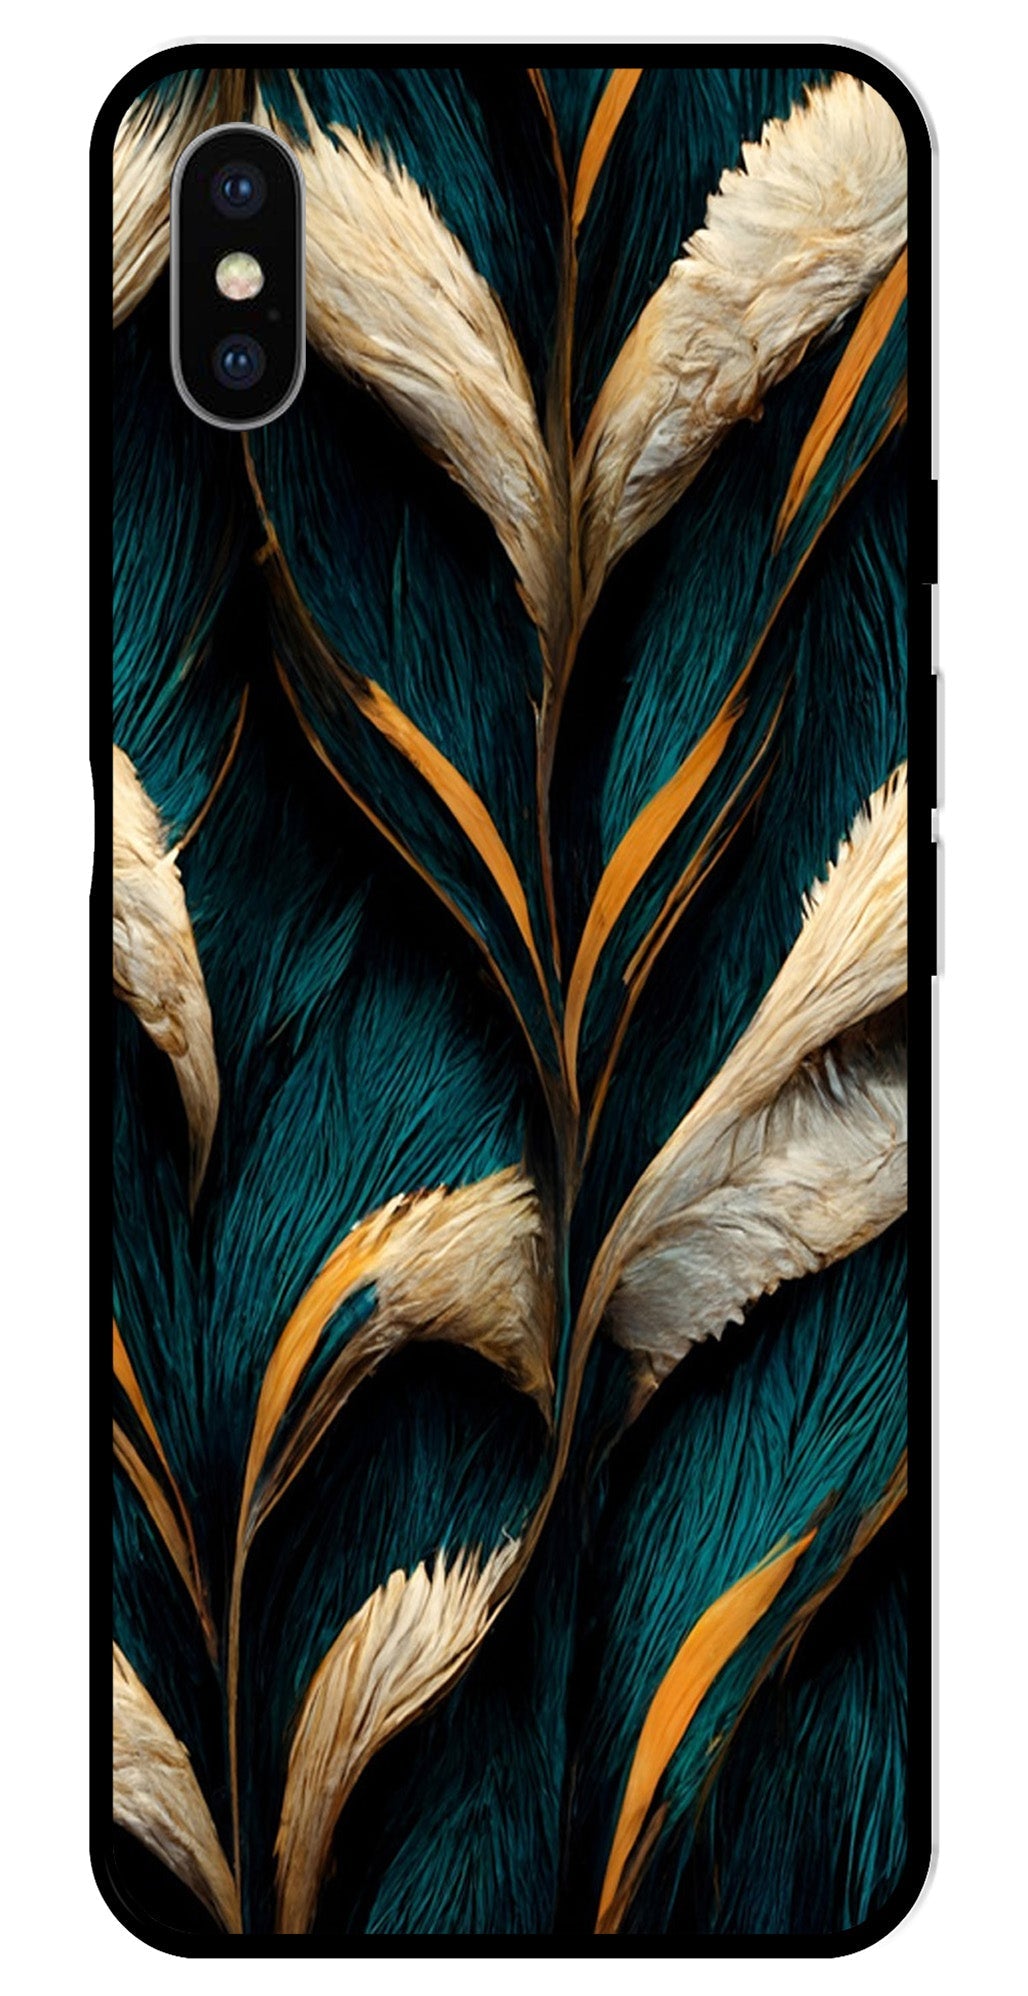 Feathers Metal Mobile Case for iPhone X Metal Case  (Design No -30)